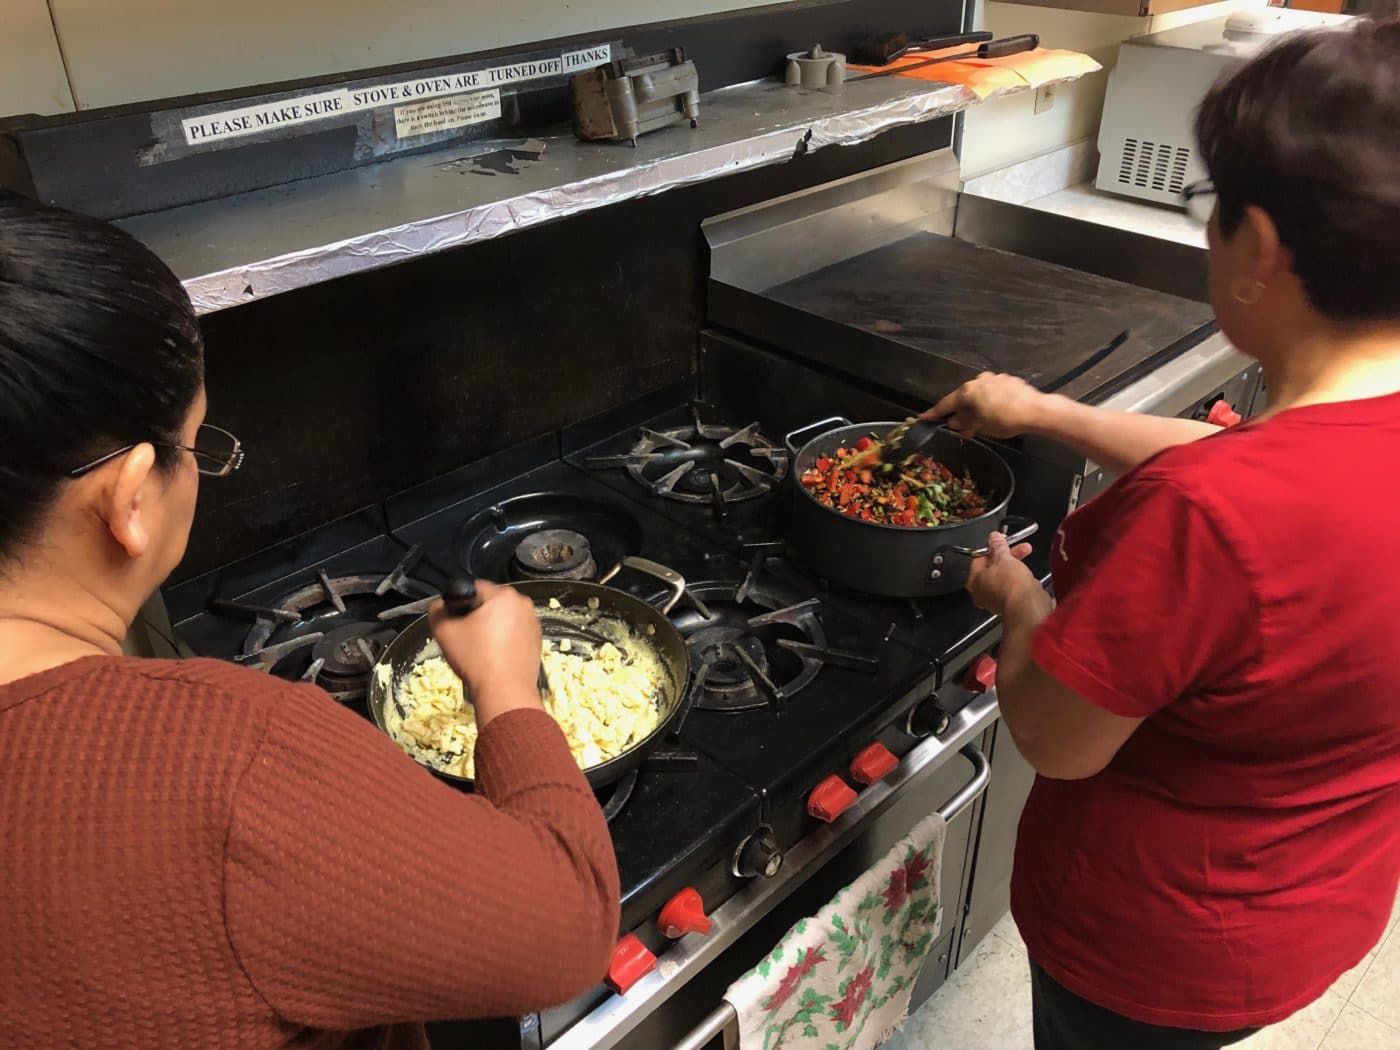 Two women cooking dishes at stove.